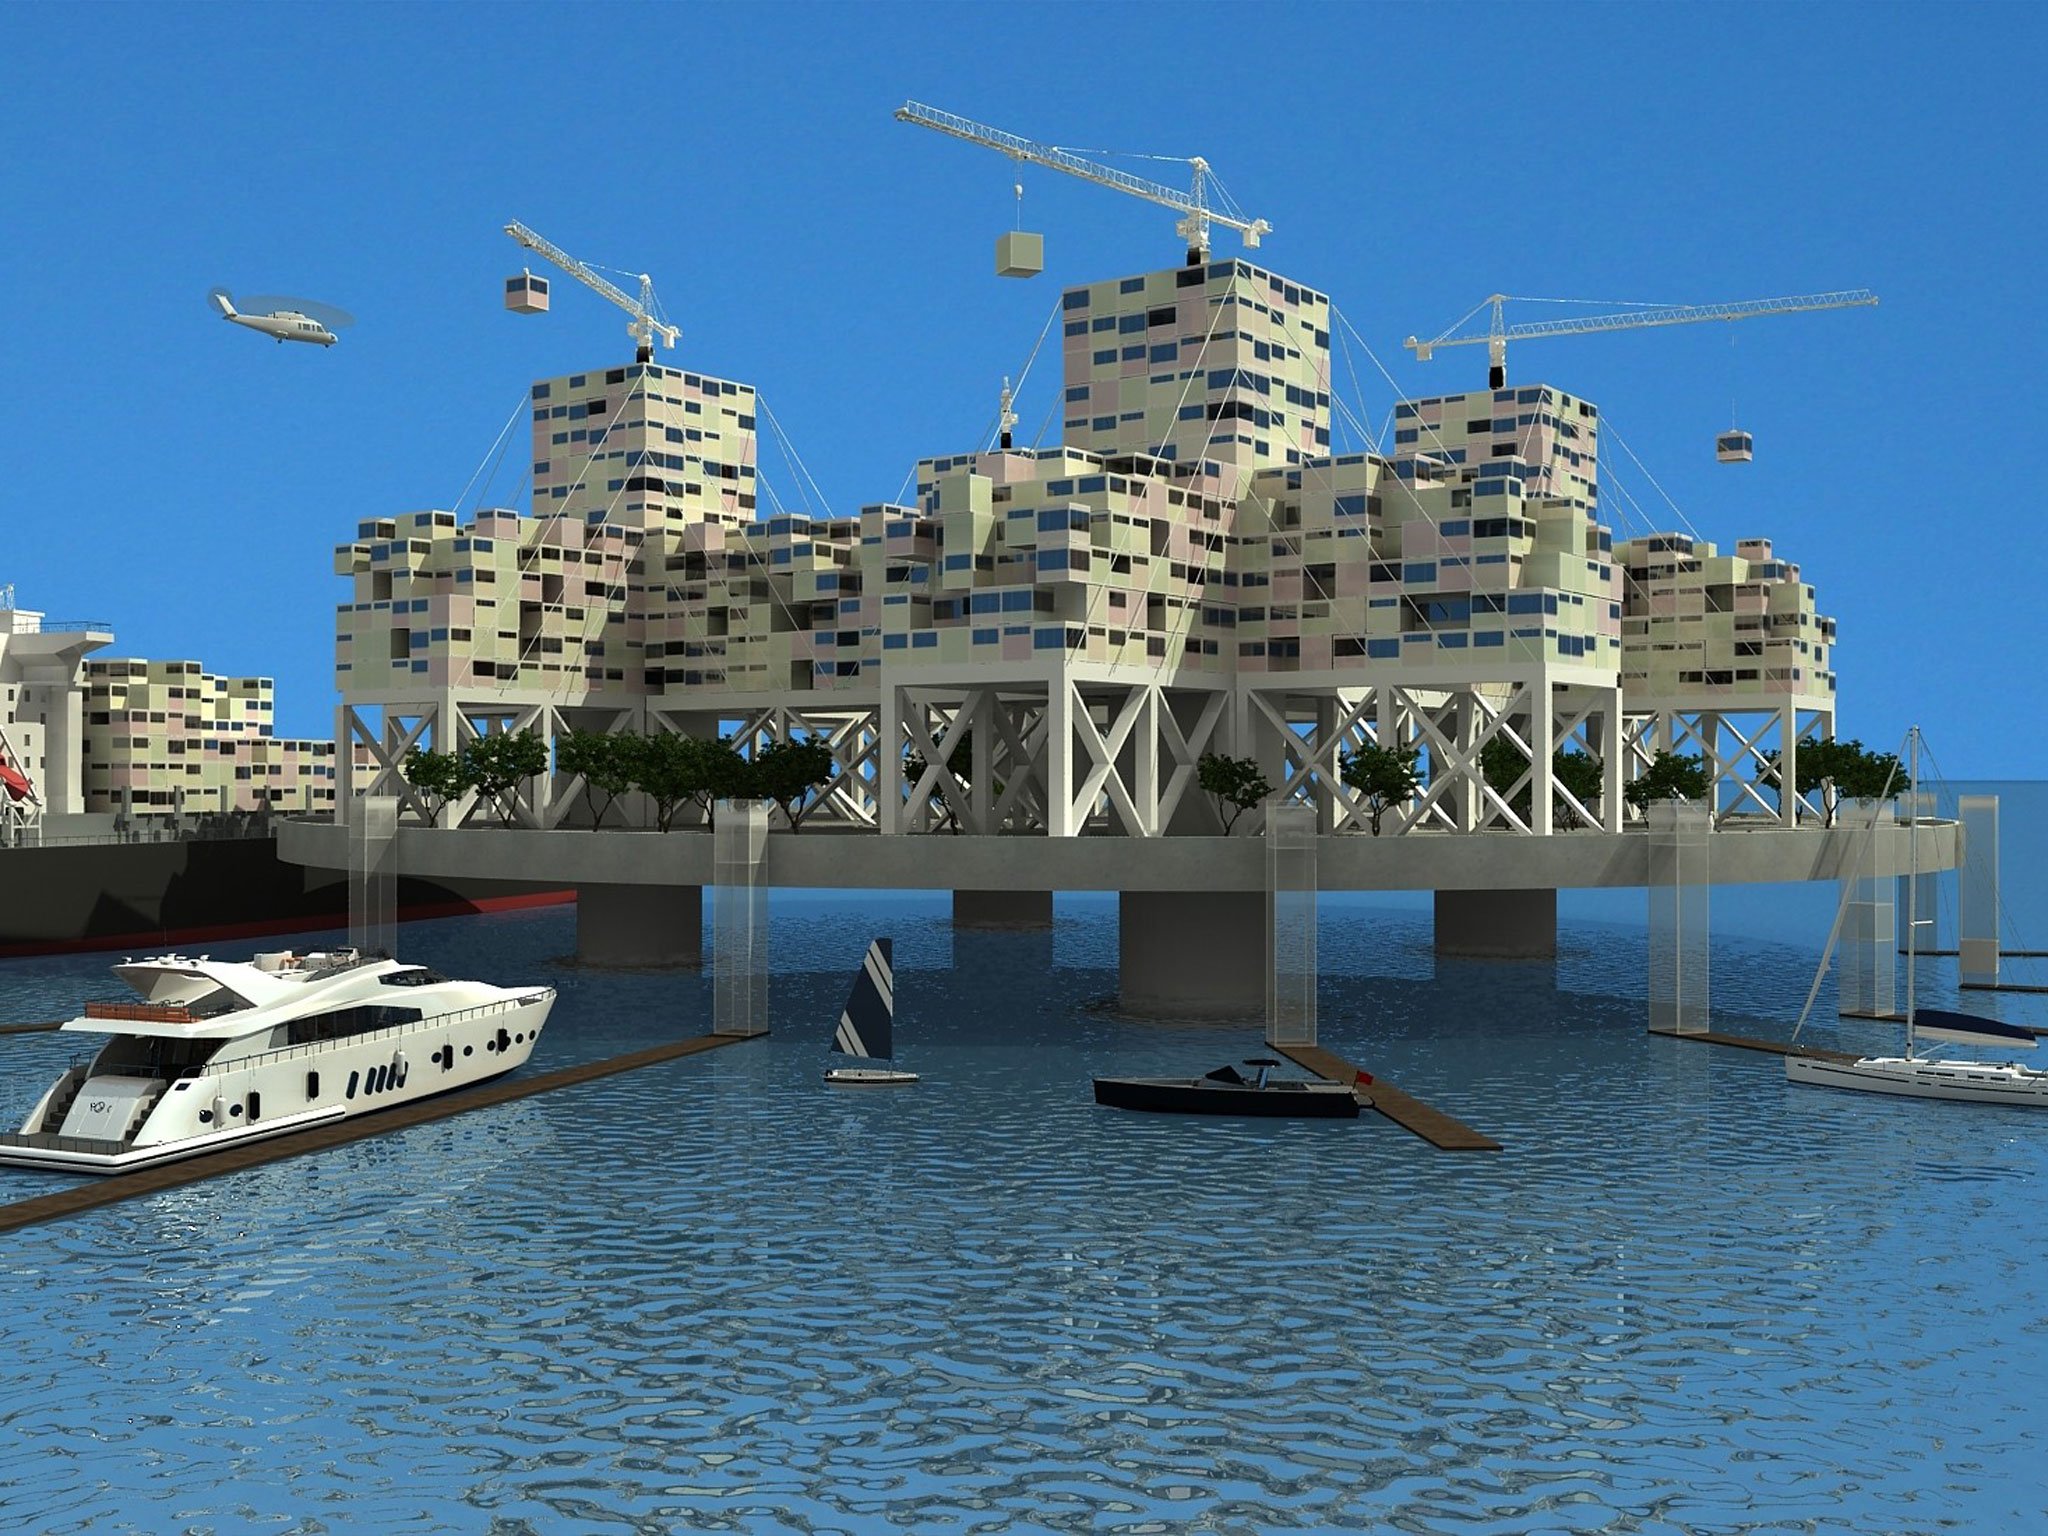 Concept for floating independent cities